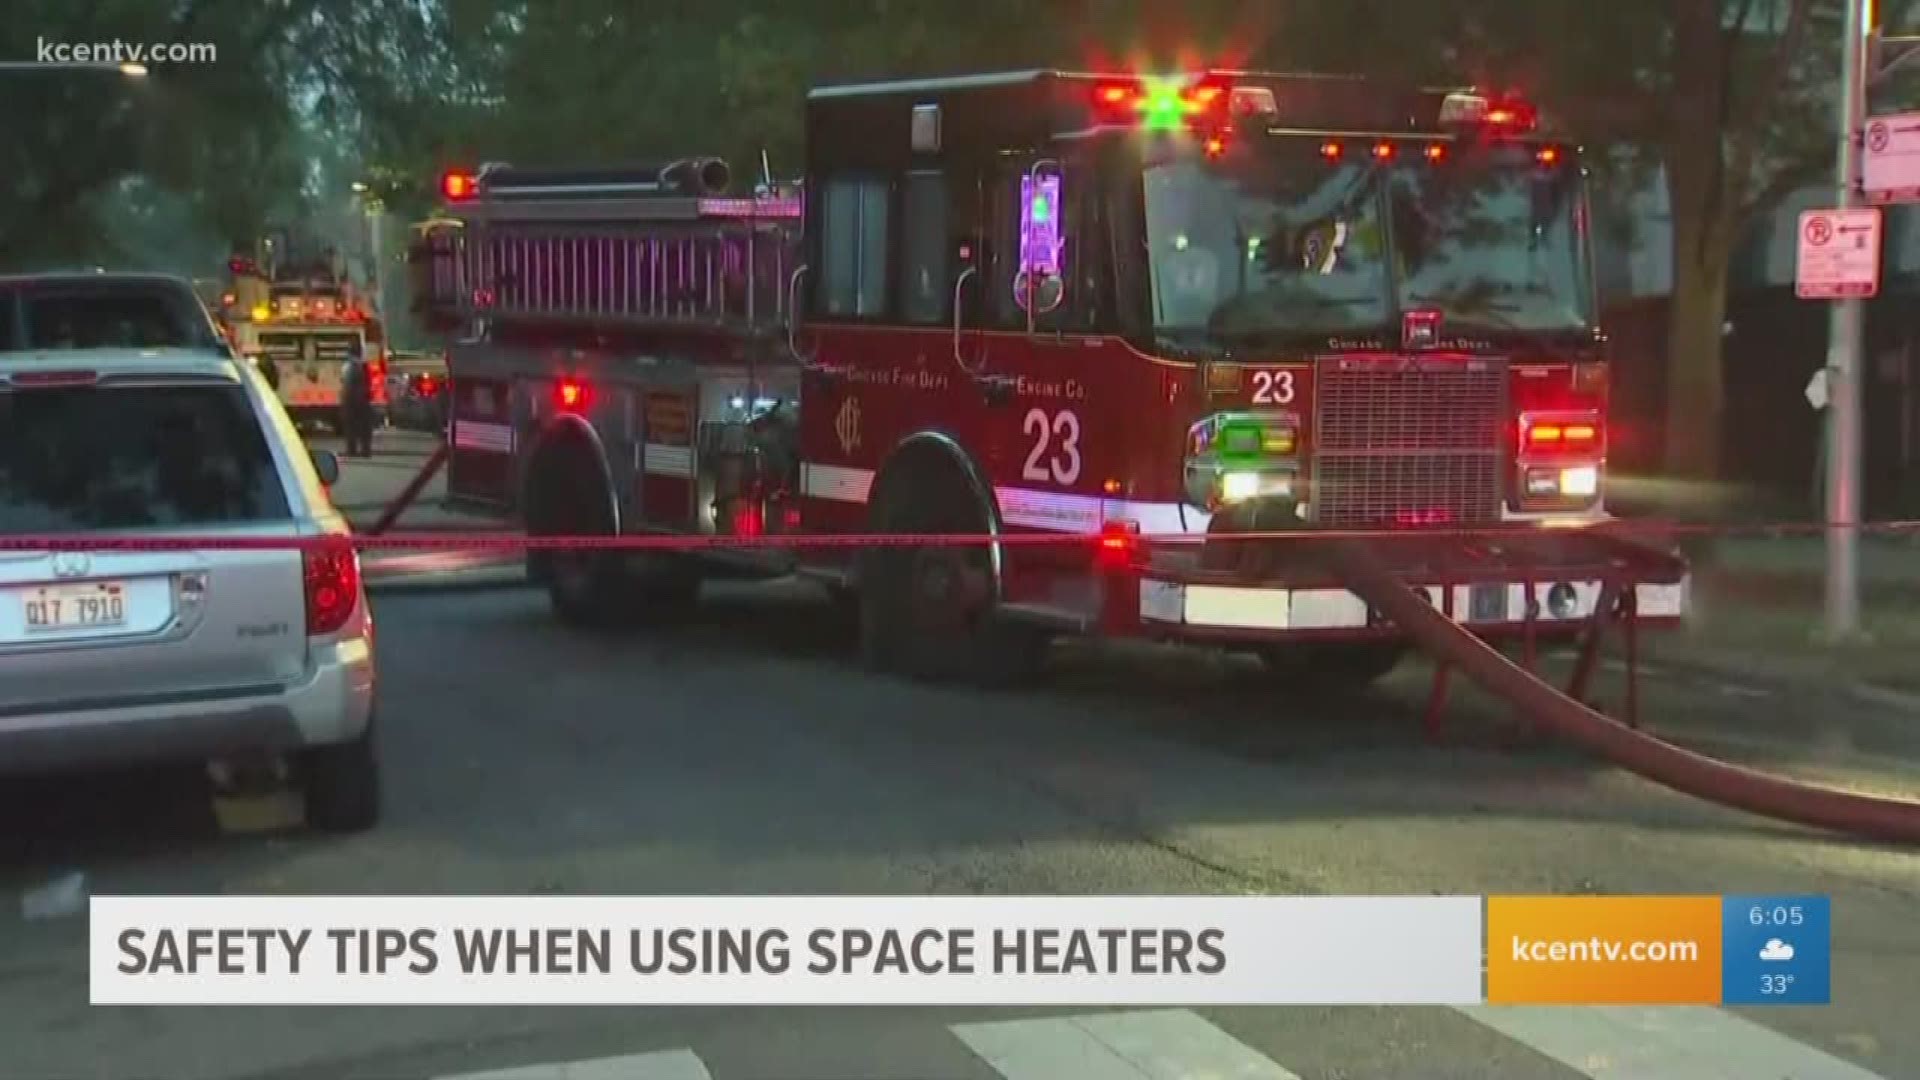 The Waco Fire Department has some safety tips for when using your space heaters this winter.